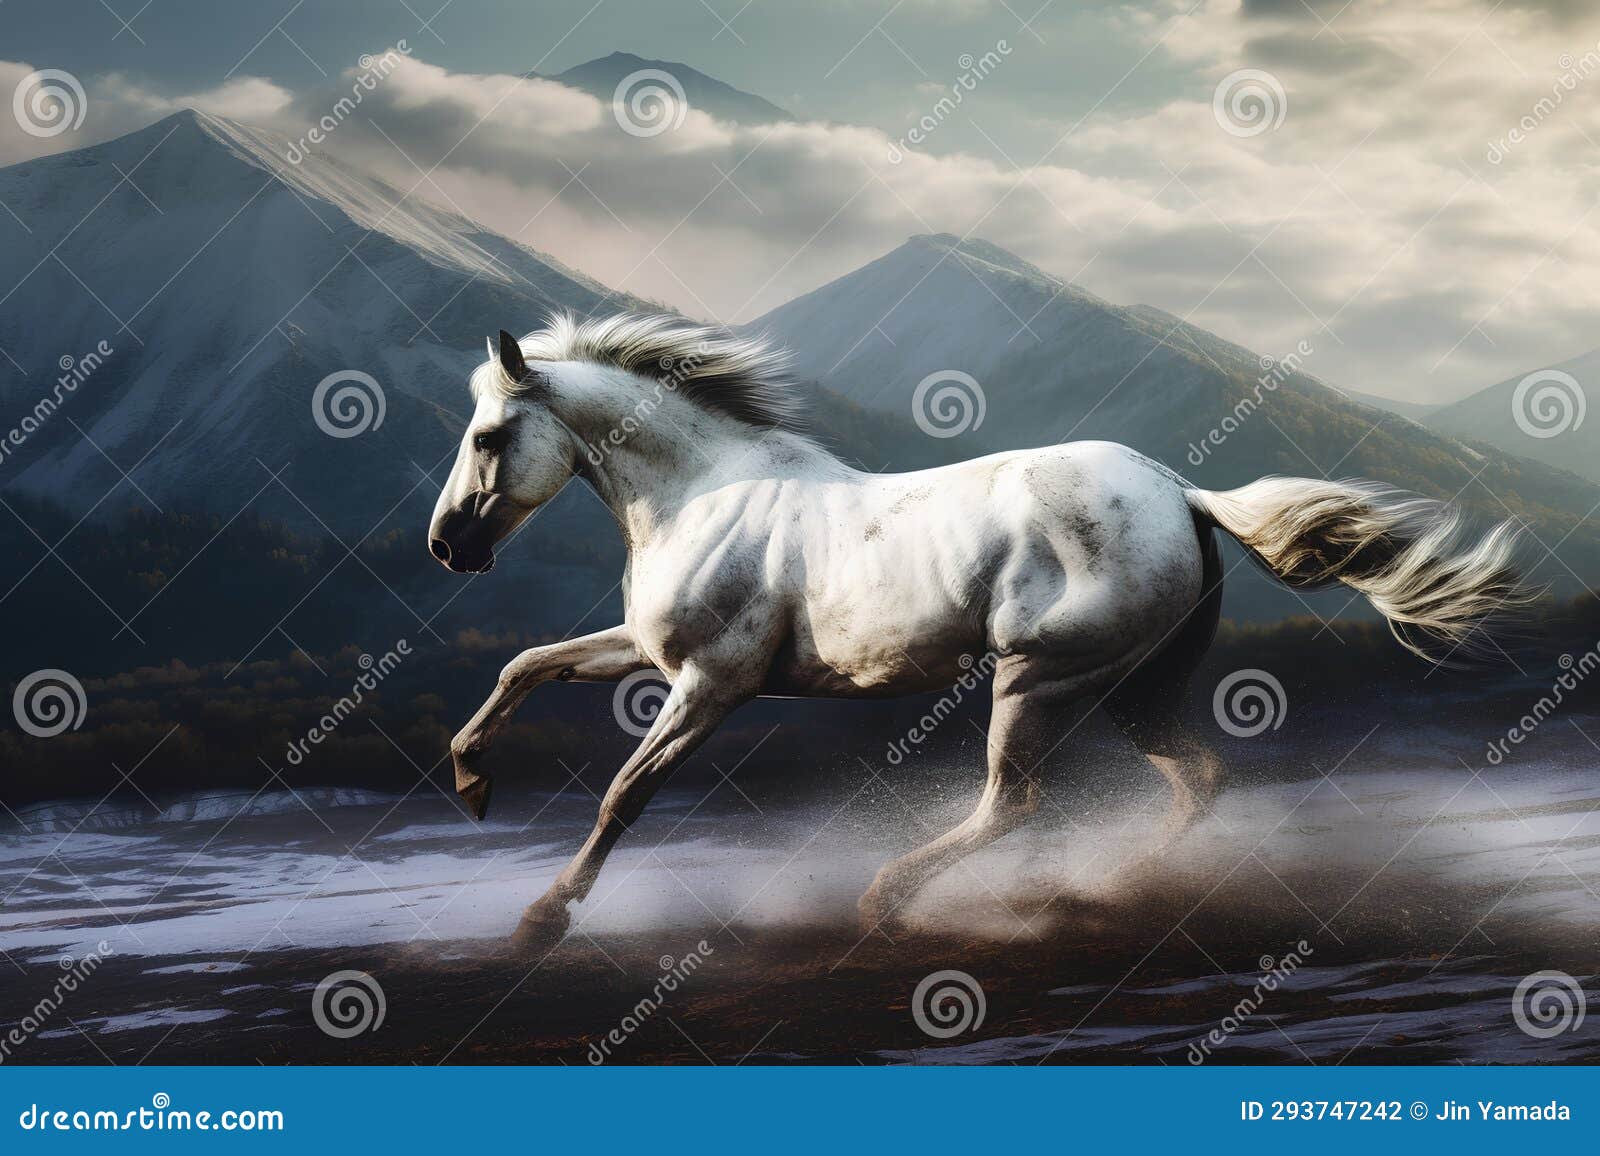 white horse running on the road in the mountains. 3d rendering